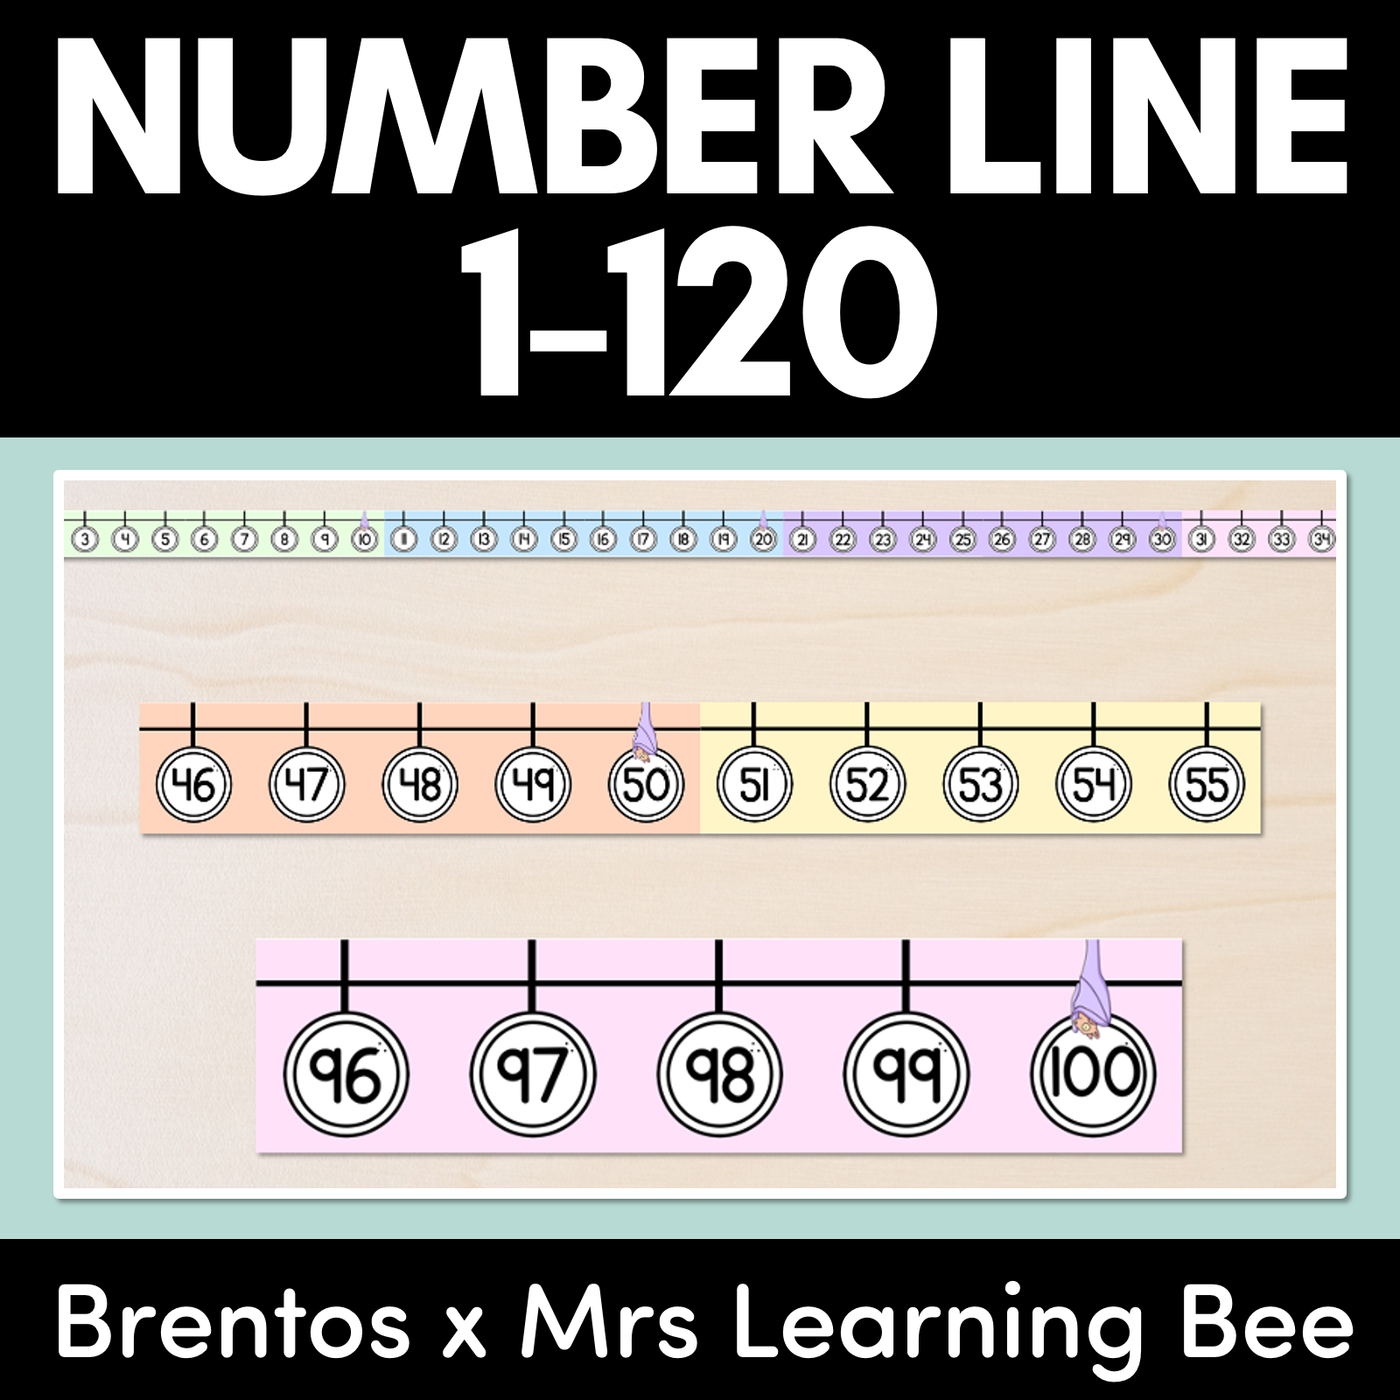 NUMBER LINE DISPLAY - The Brentos Collection